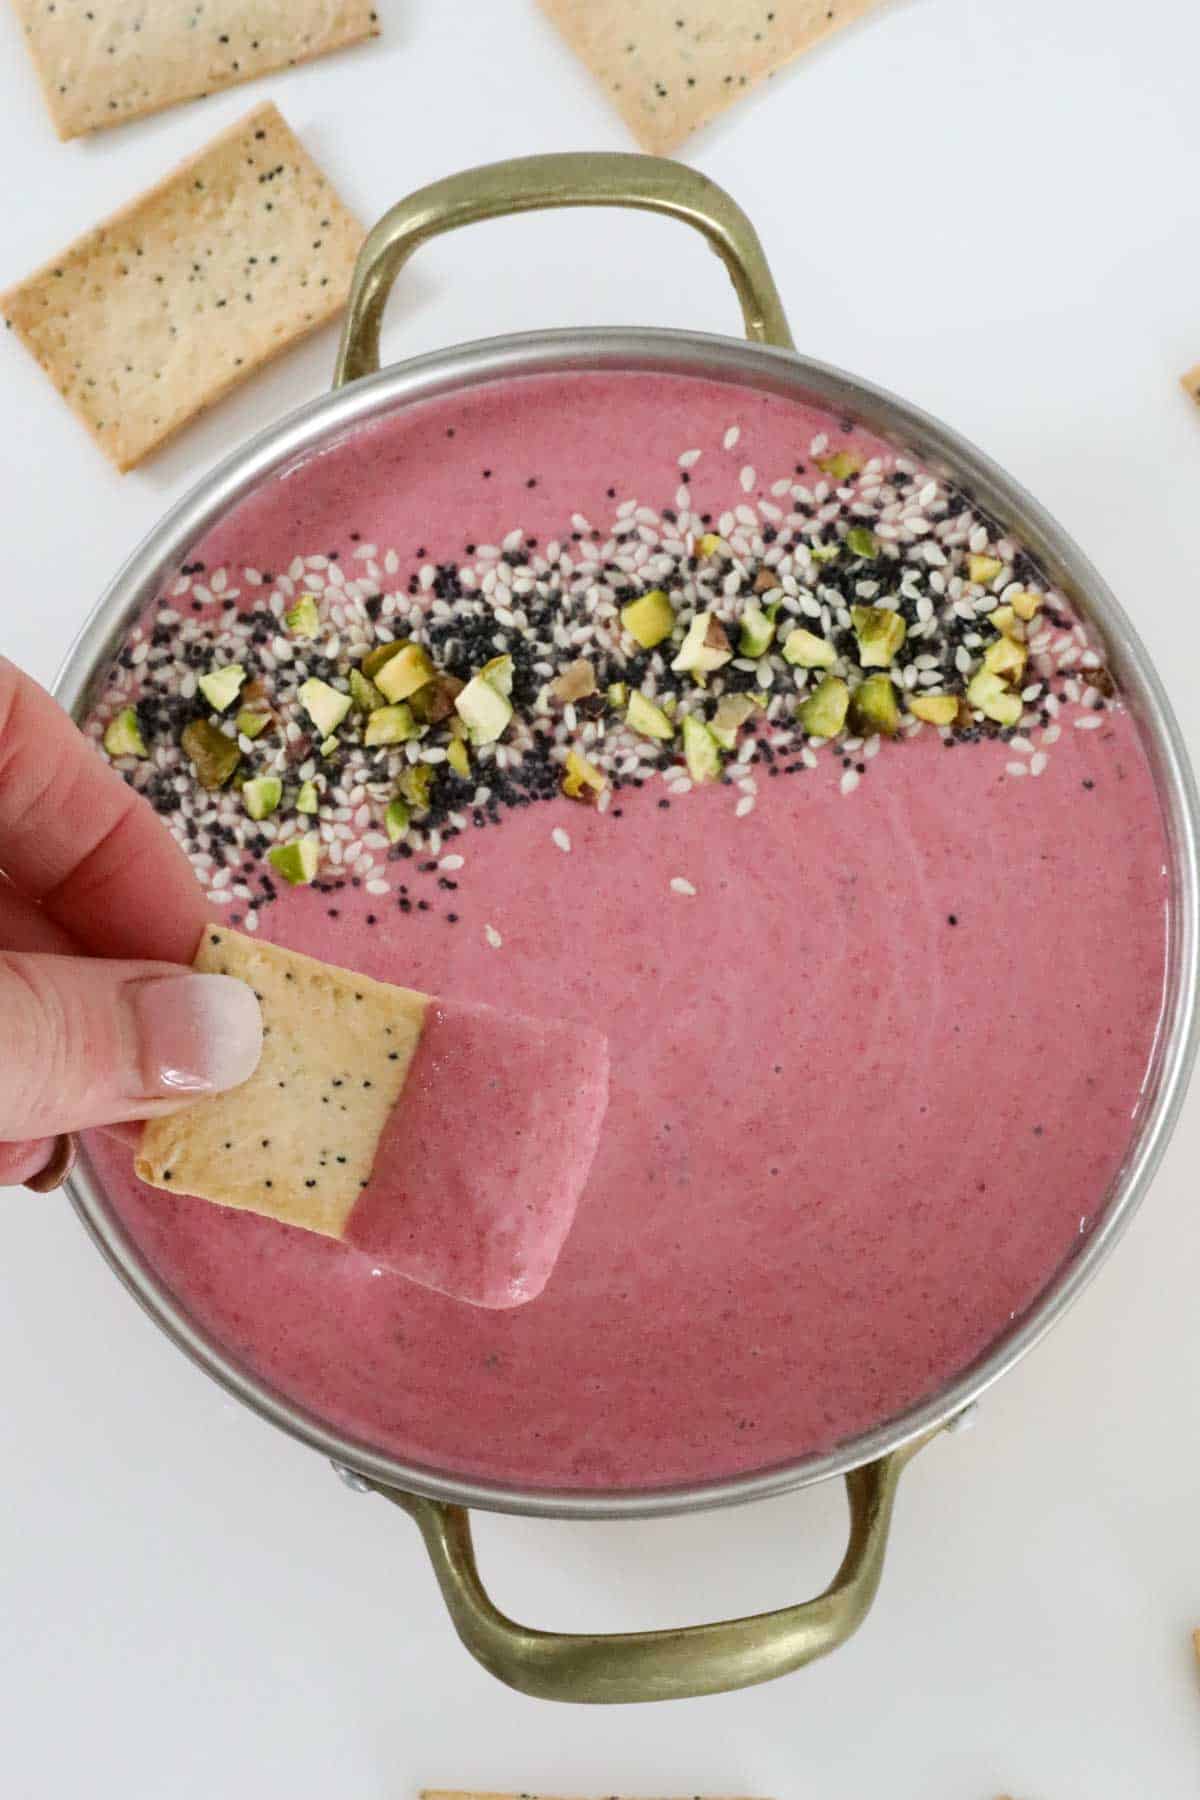 A cracker being dipped into a bowl of pink dip.